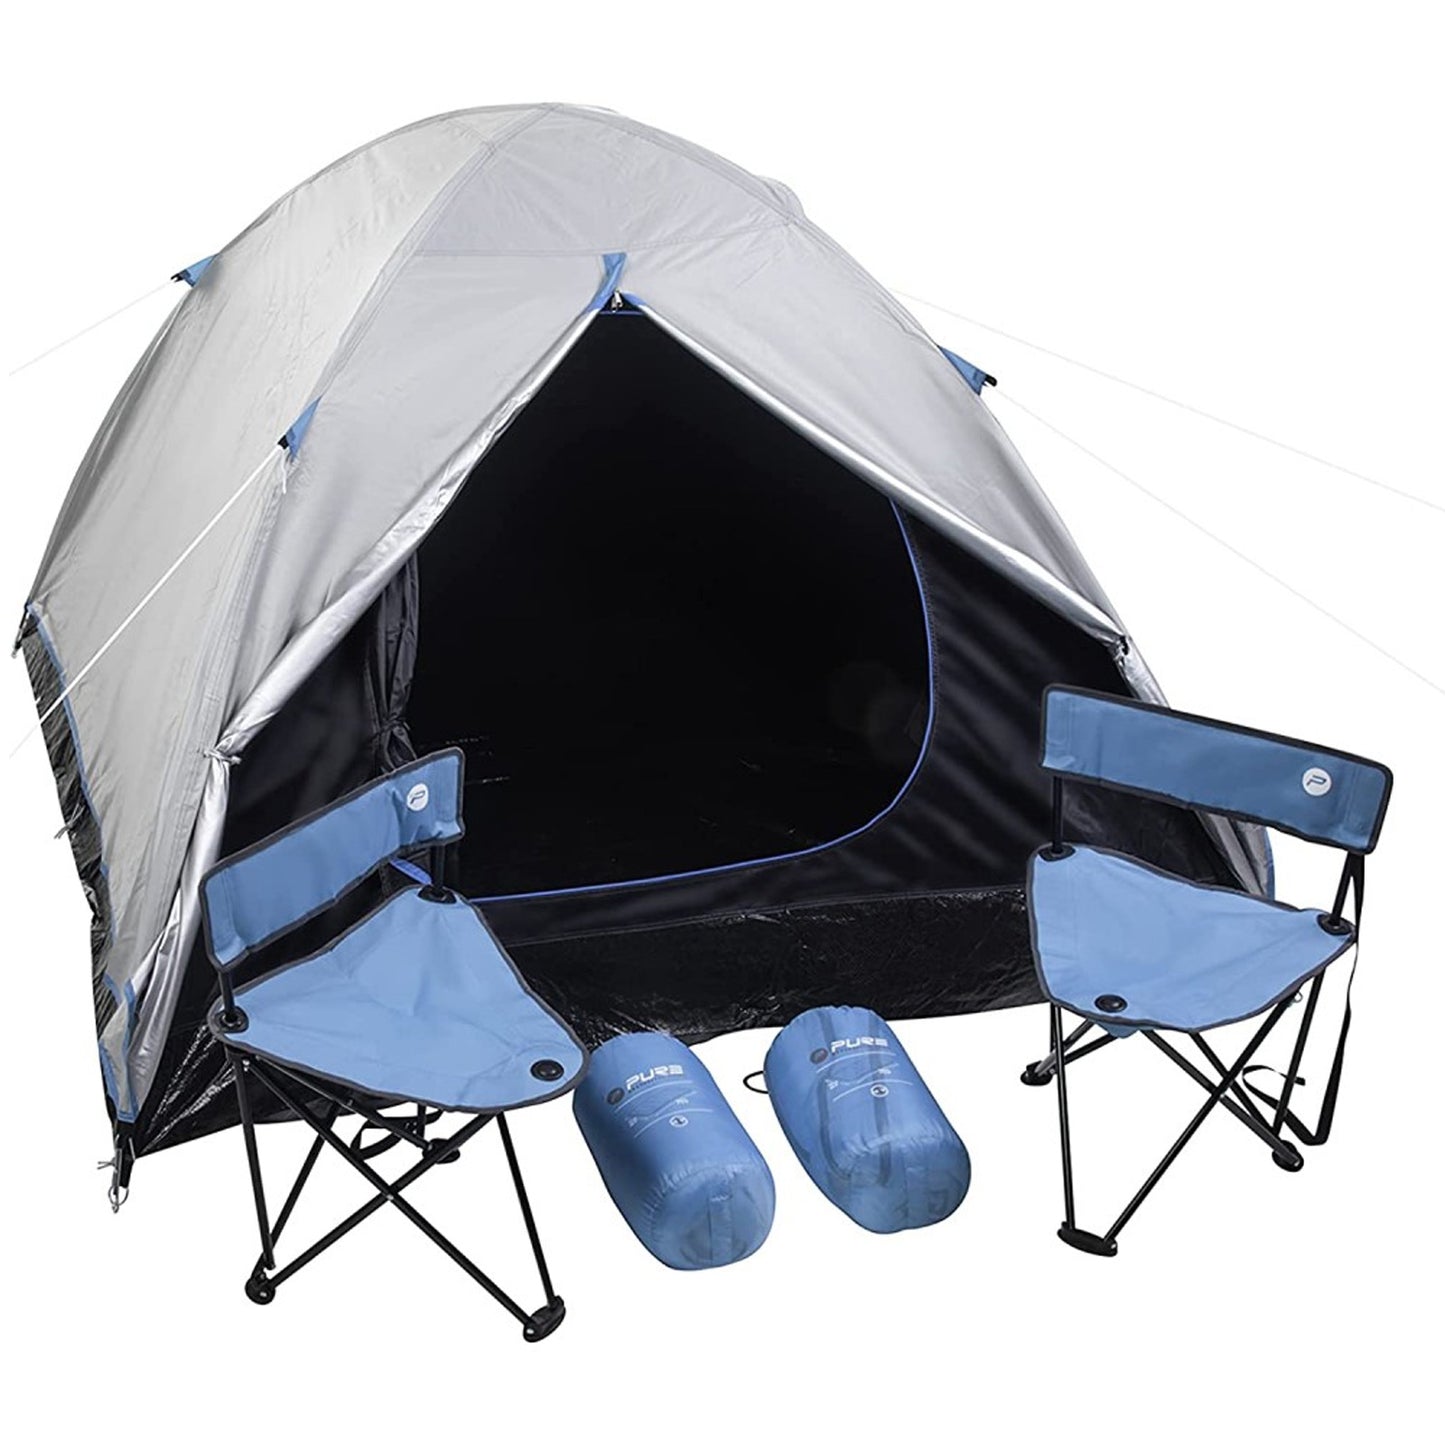 Pure4Fun Complete Camping Set